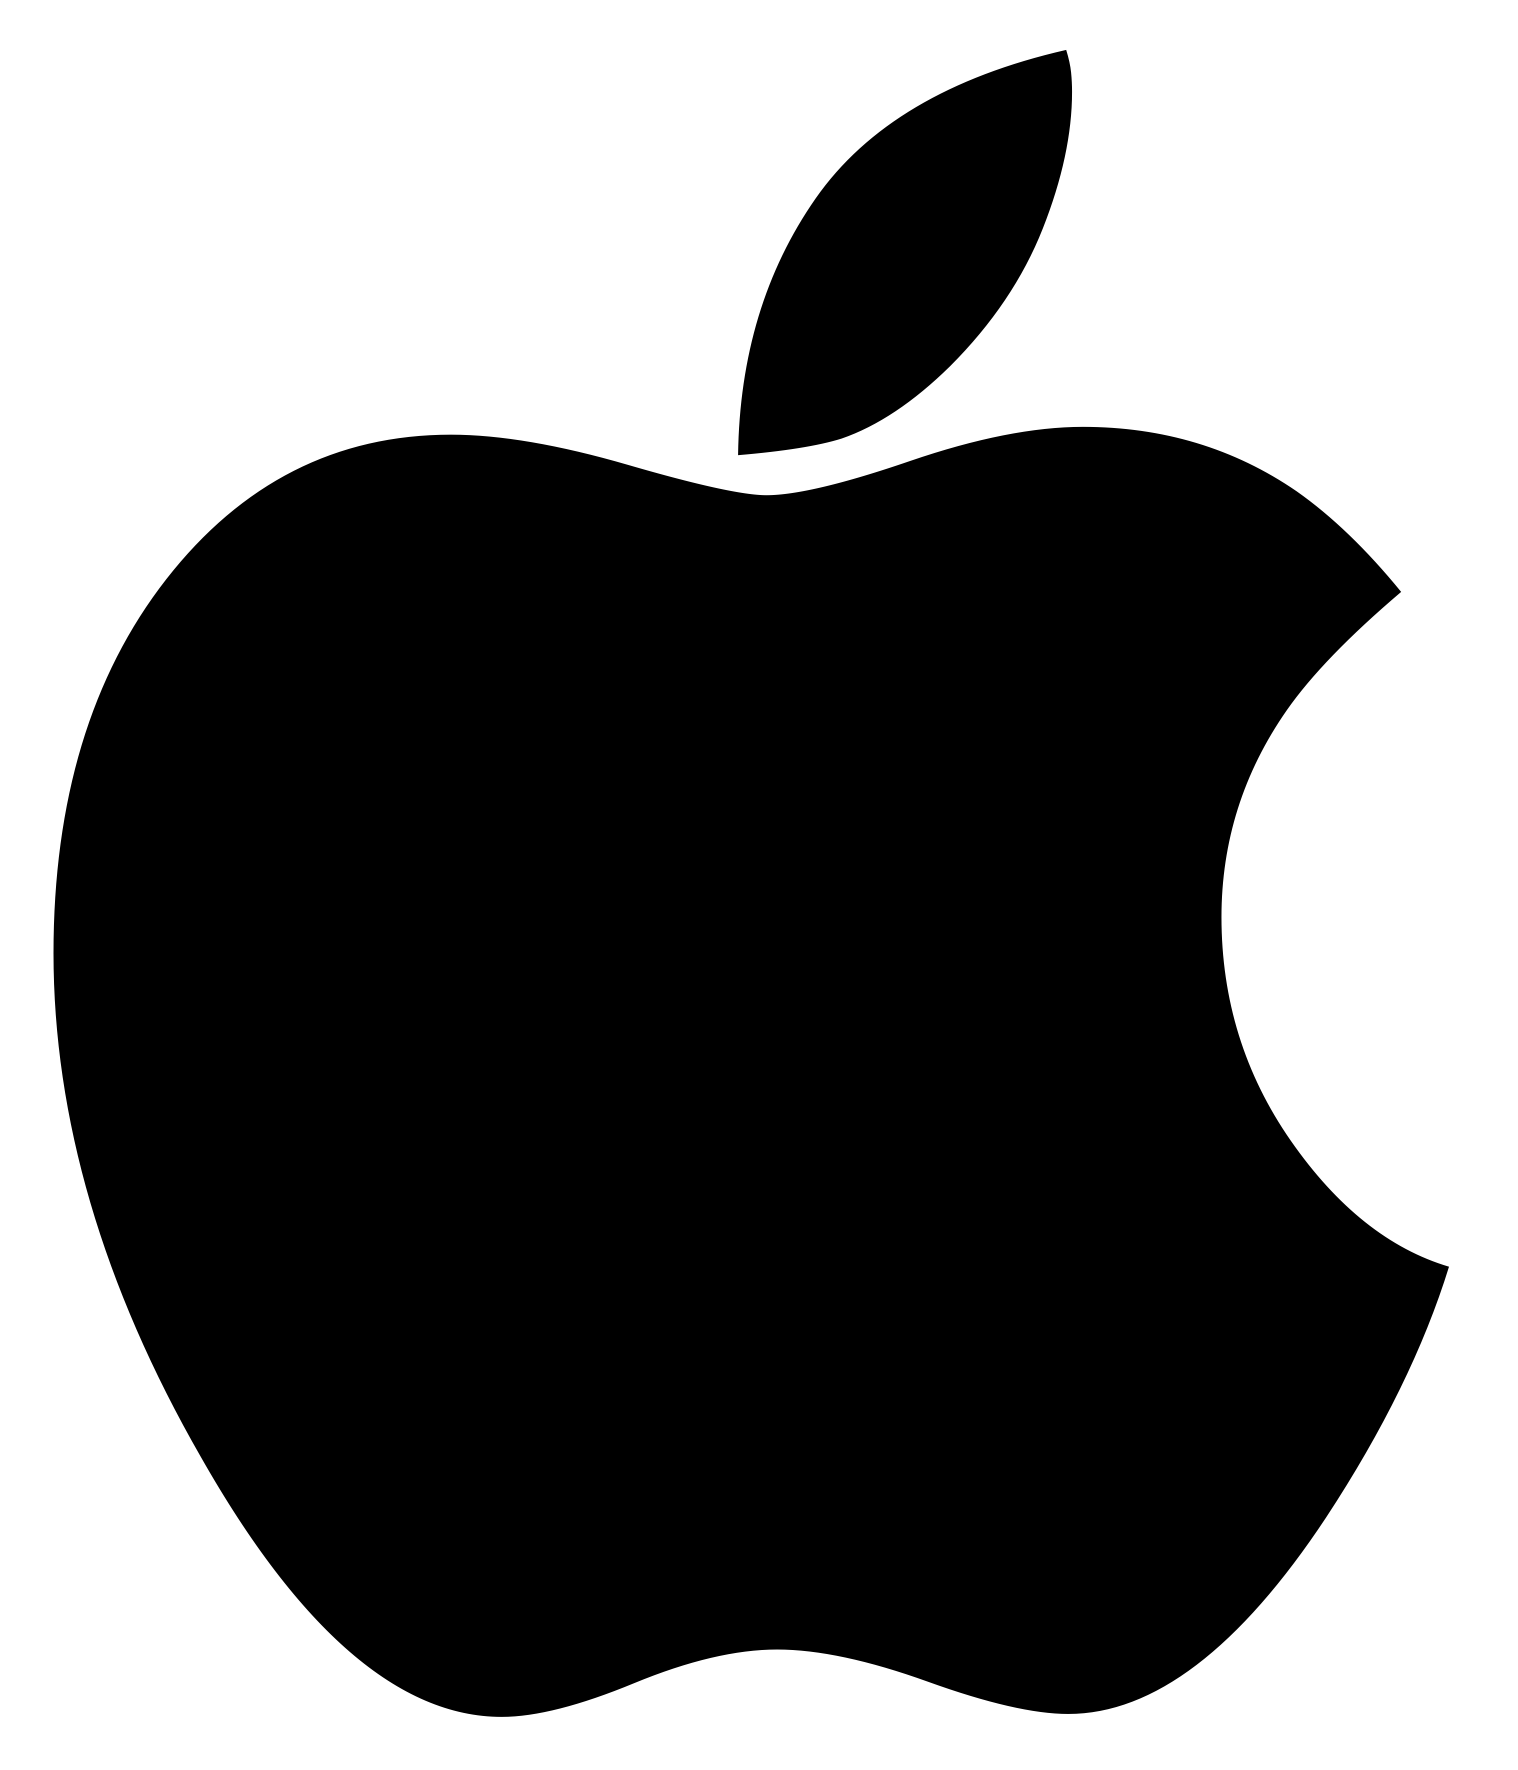 Black Apple logo with no background